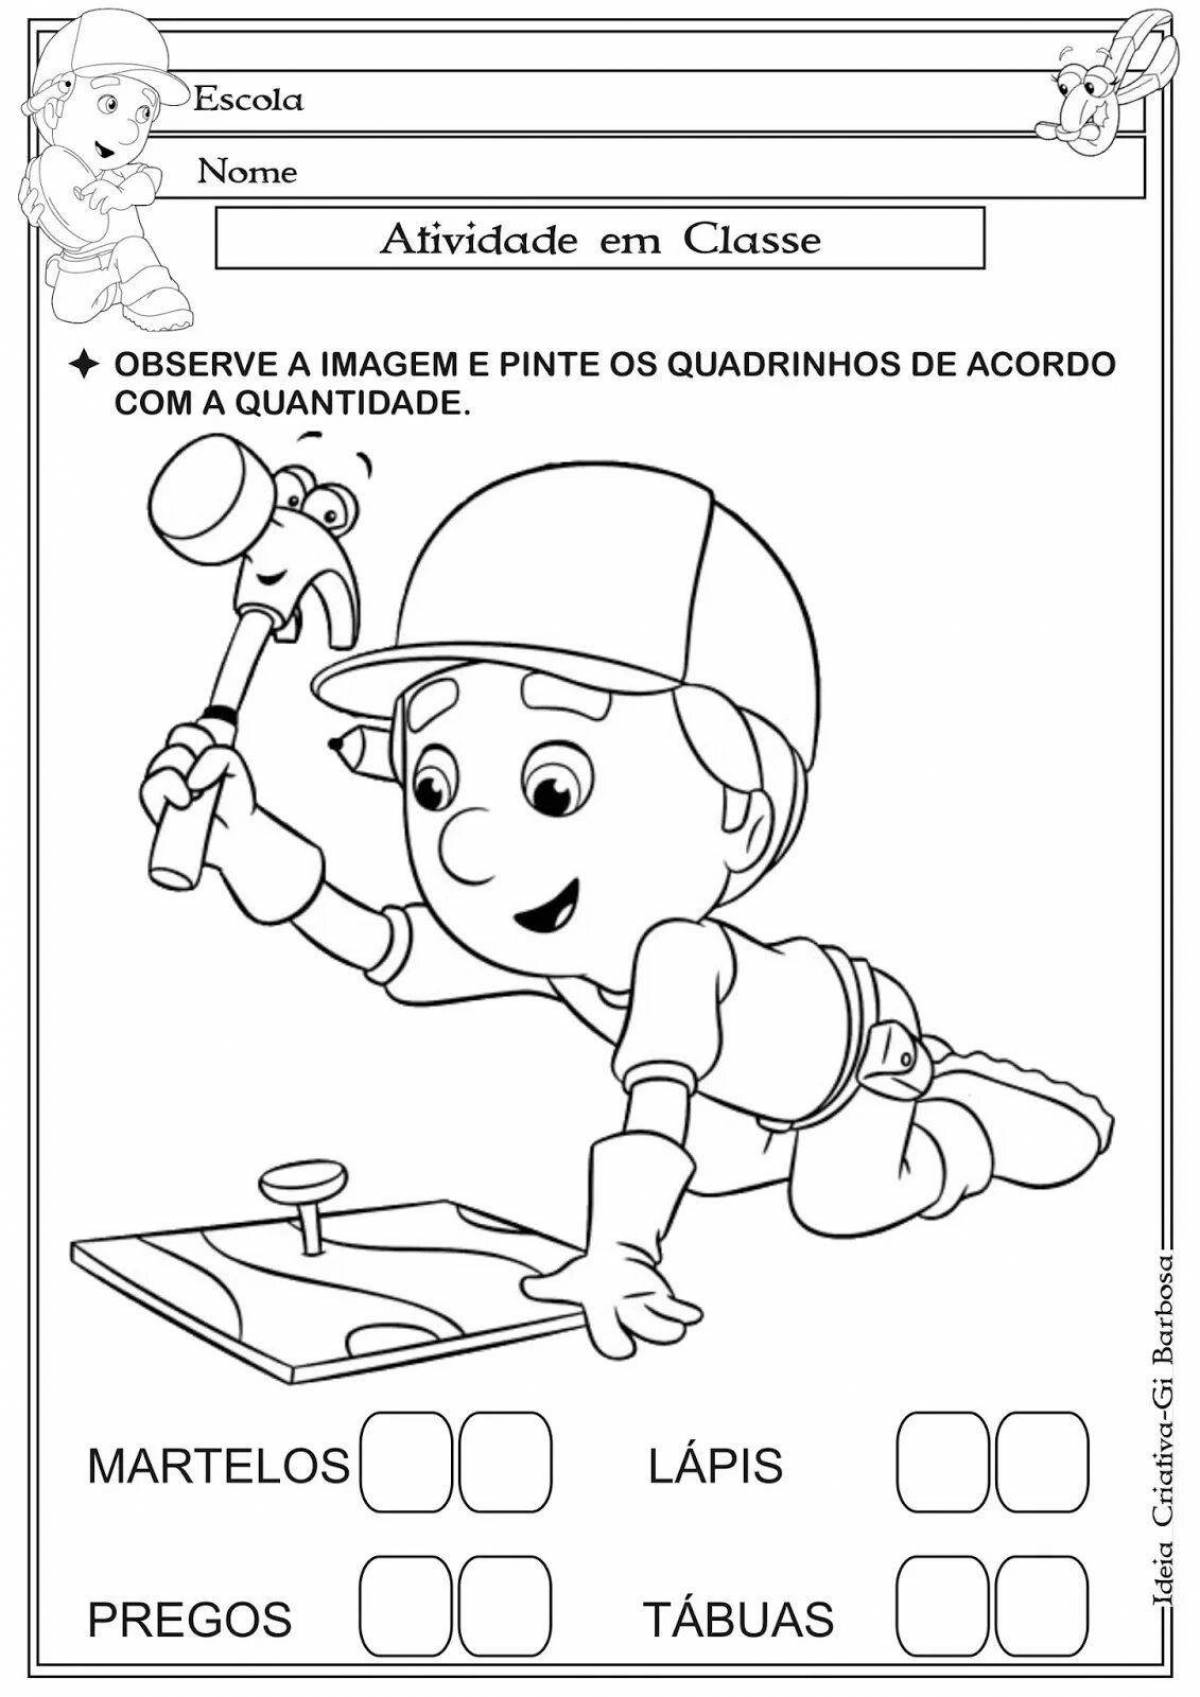 Occupational safety for children #6